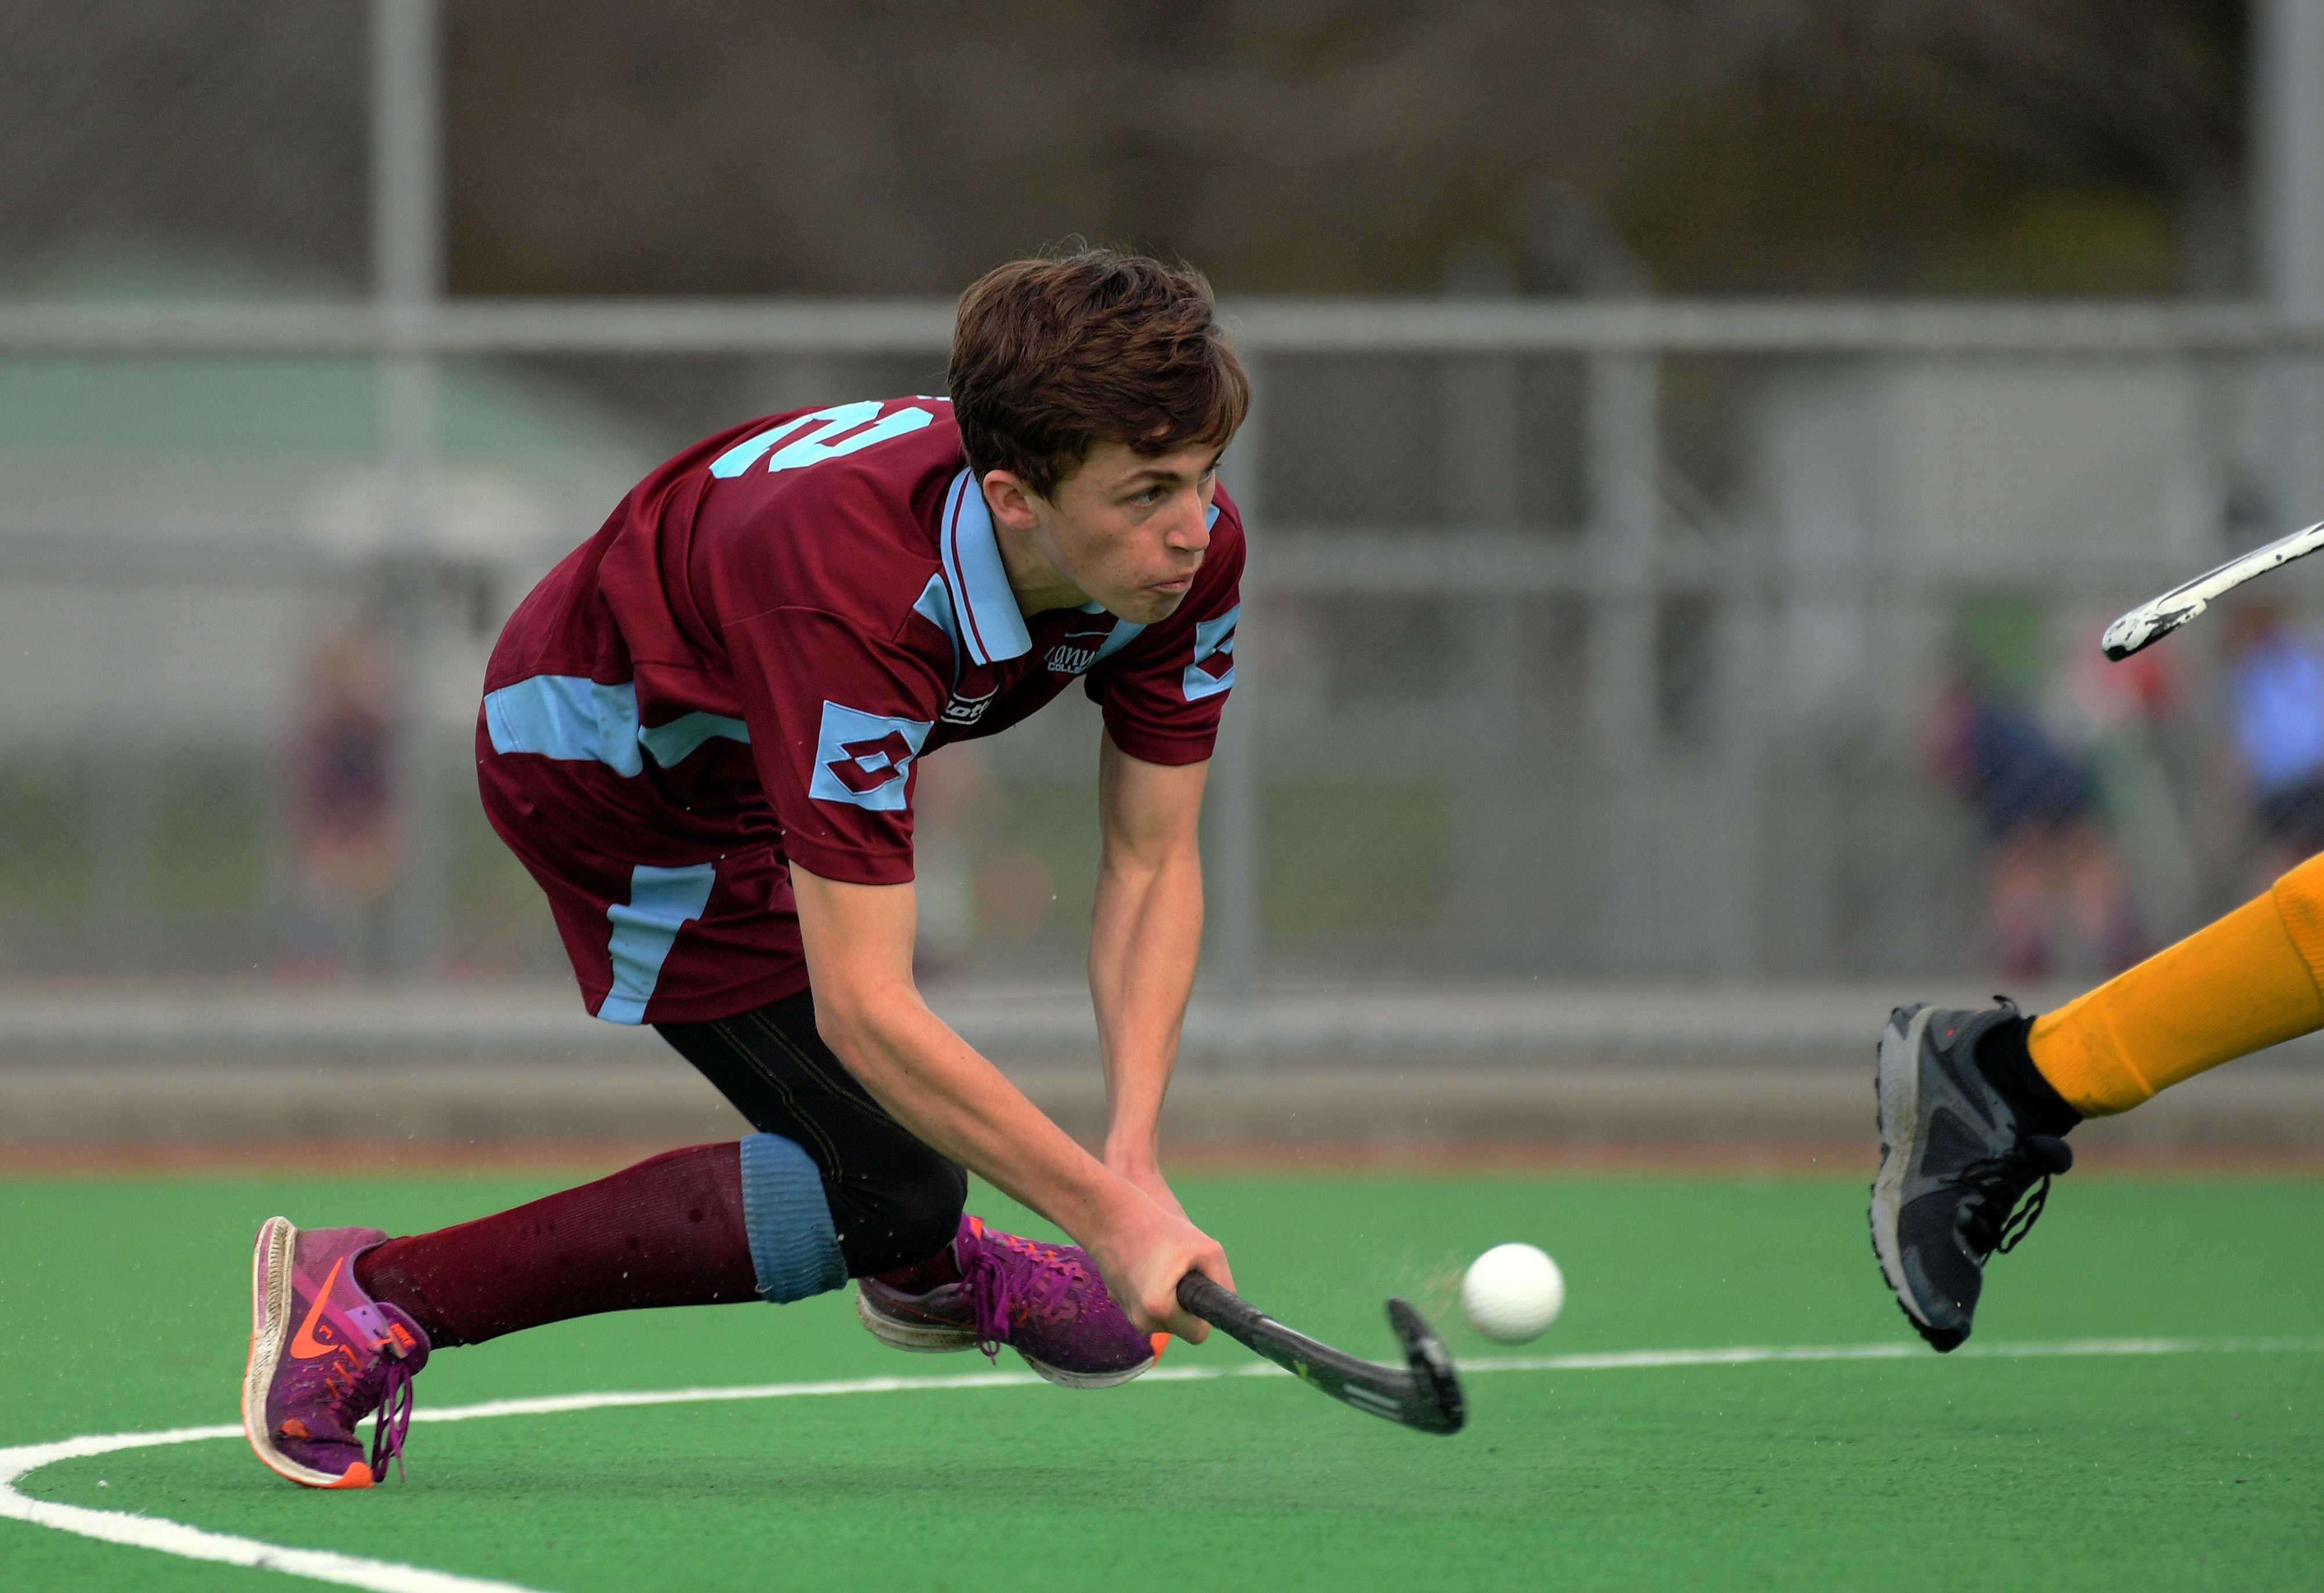 Boys 1st XI hockey. Kuranui College v Tararua College Sports Exchange at Clareville Twin Turfs in Carterton, New Zealand on Friday, 11 August 2017. Photo: Dave Lintott / lintottphoto.co.nz